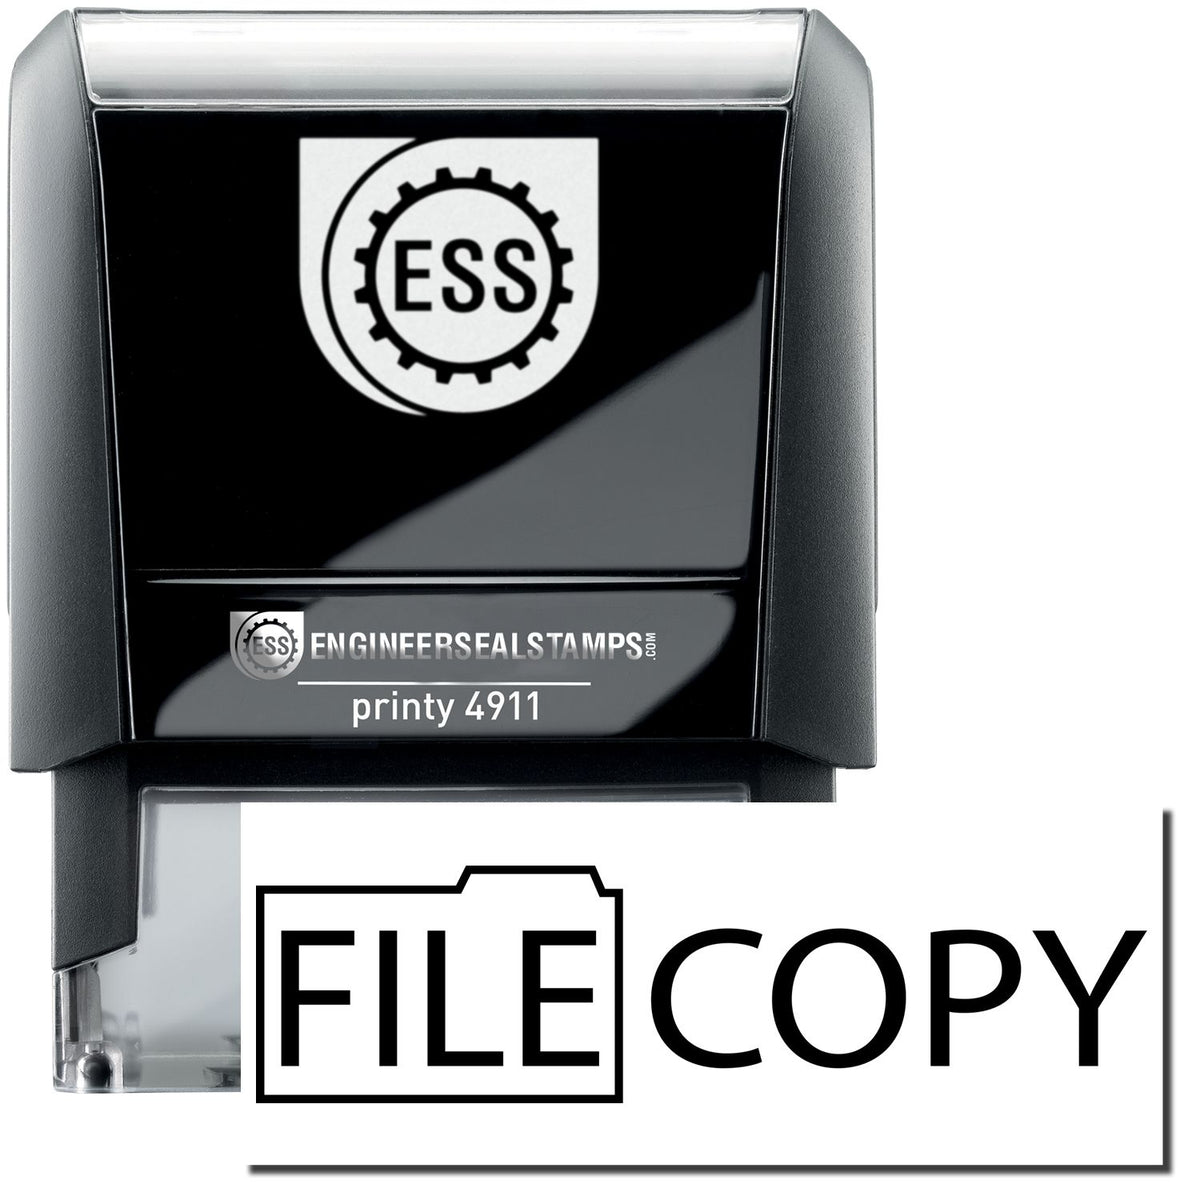 A self-inking stamp with a stamped image showing how the text &quot;FILE COPY&quot; with a graphic of a folder is displayed after stamping.